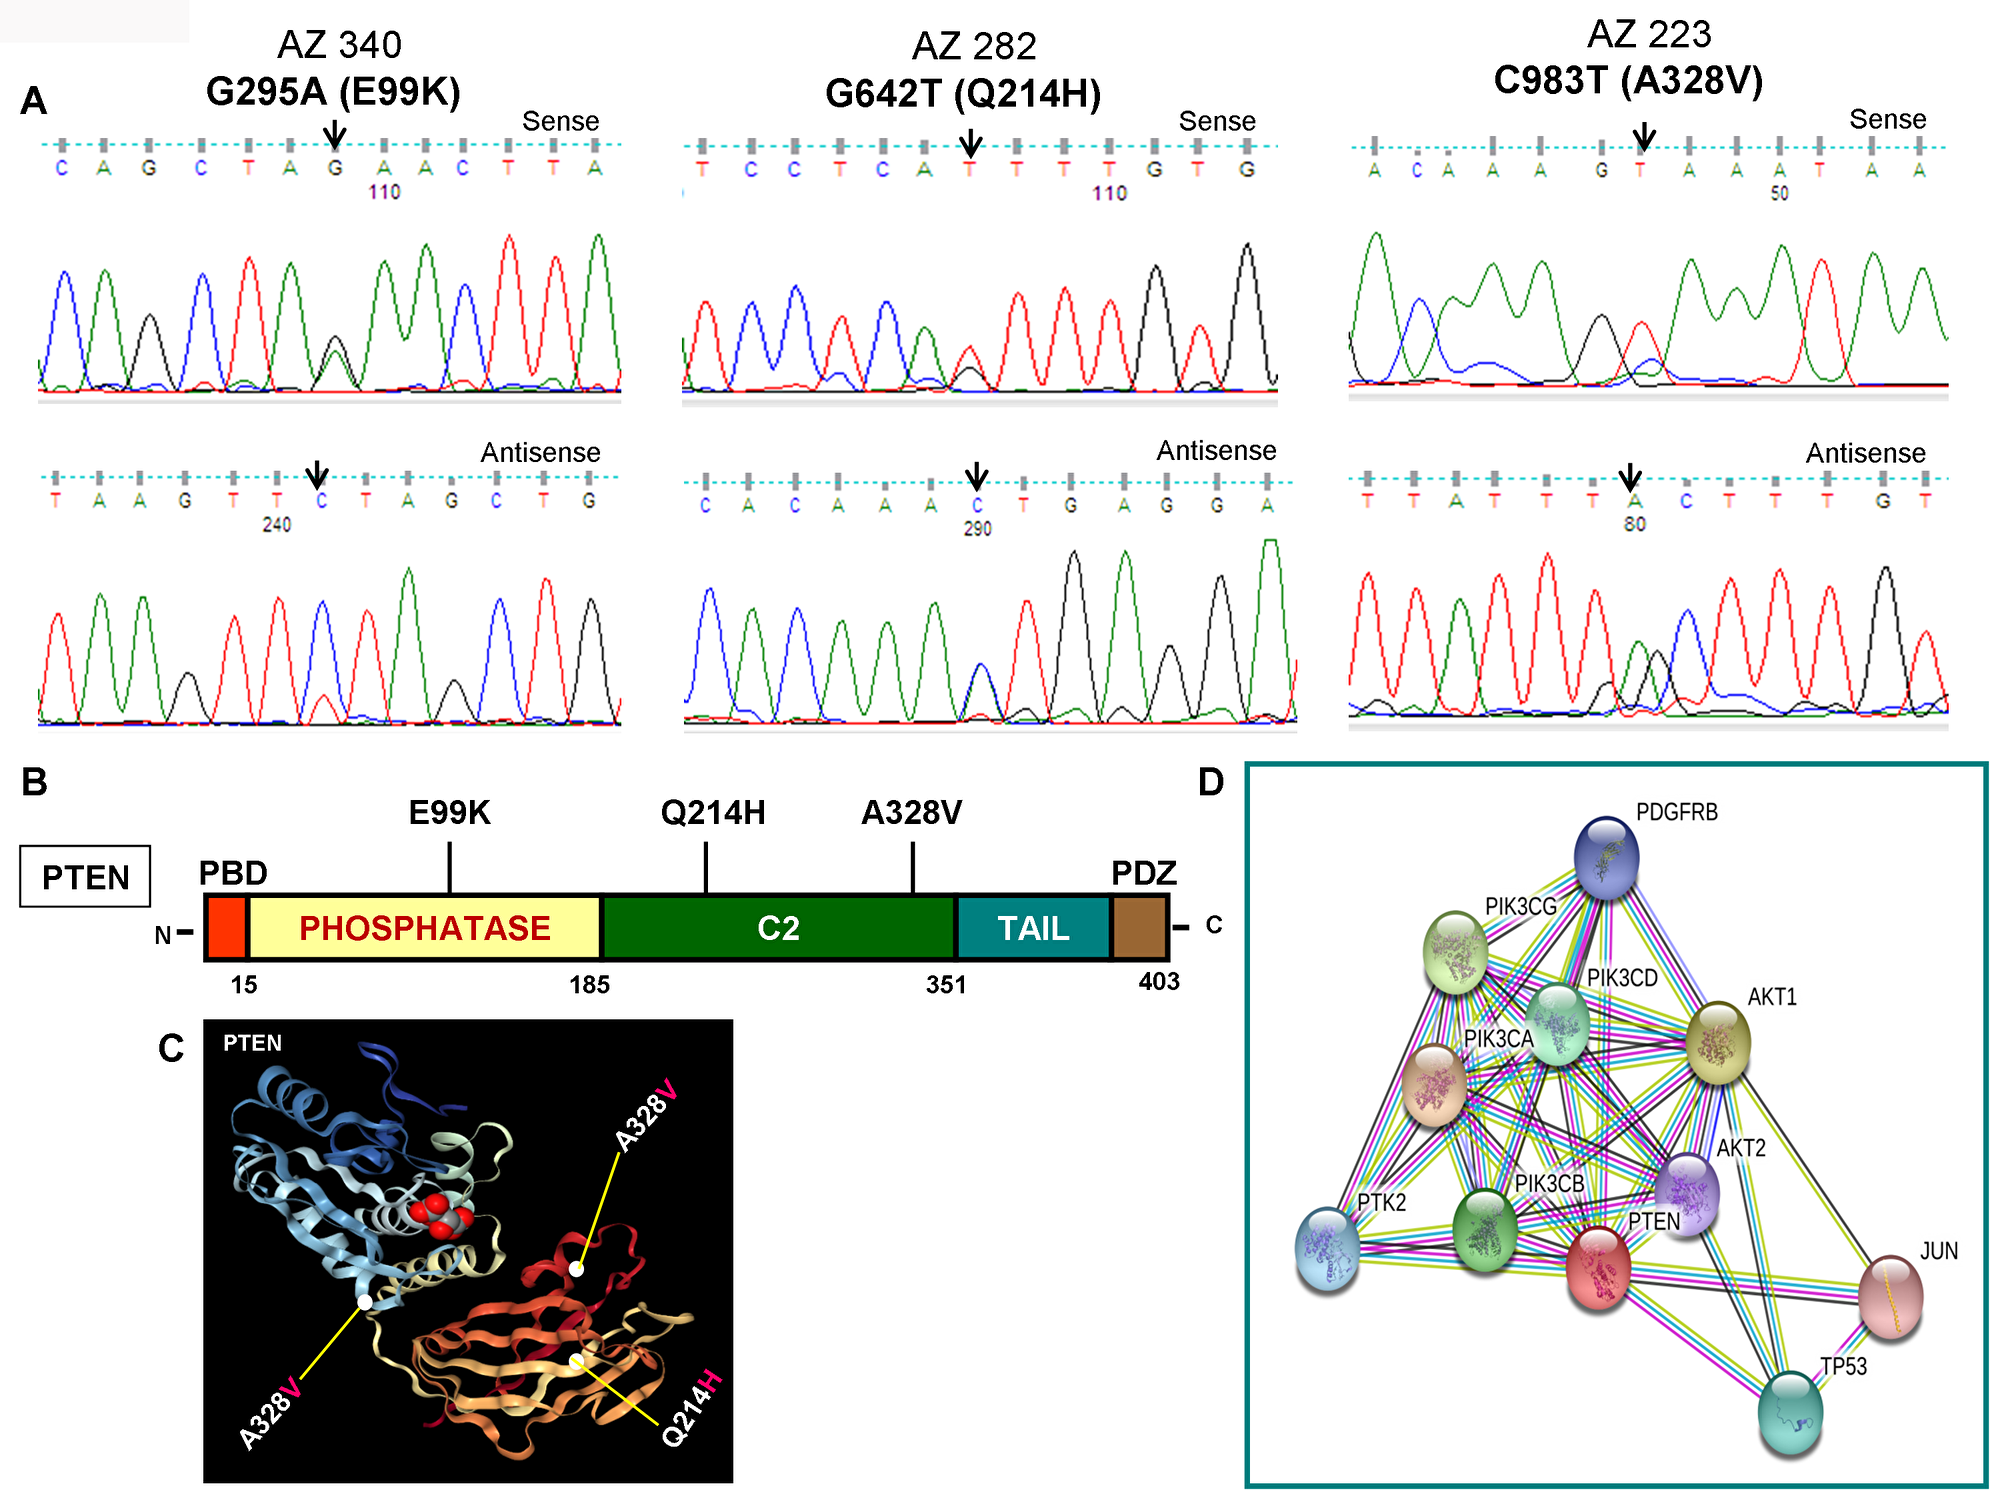 Identification of PTEN mutations, corresponding domains, and interactome of PTEN.